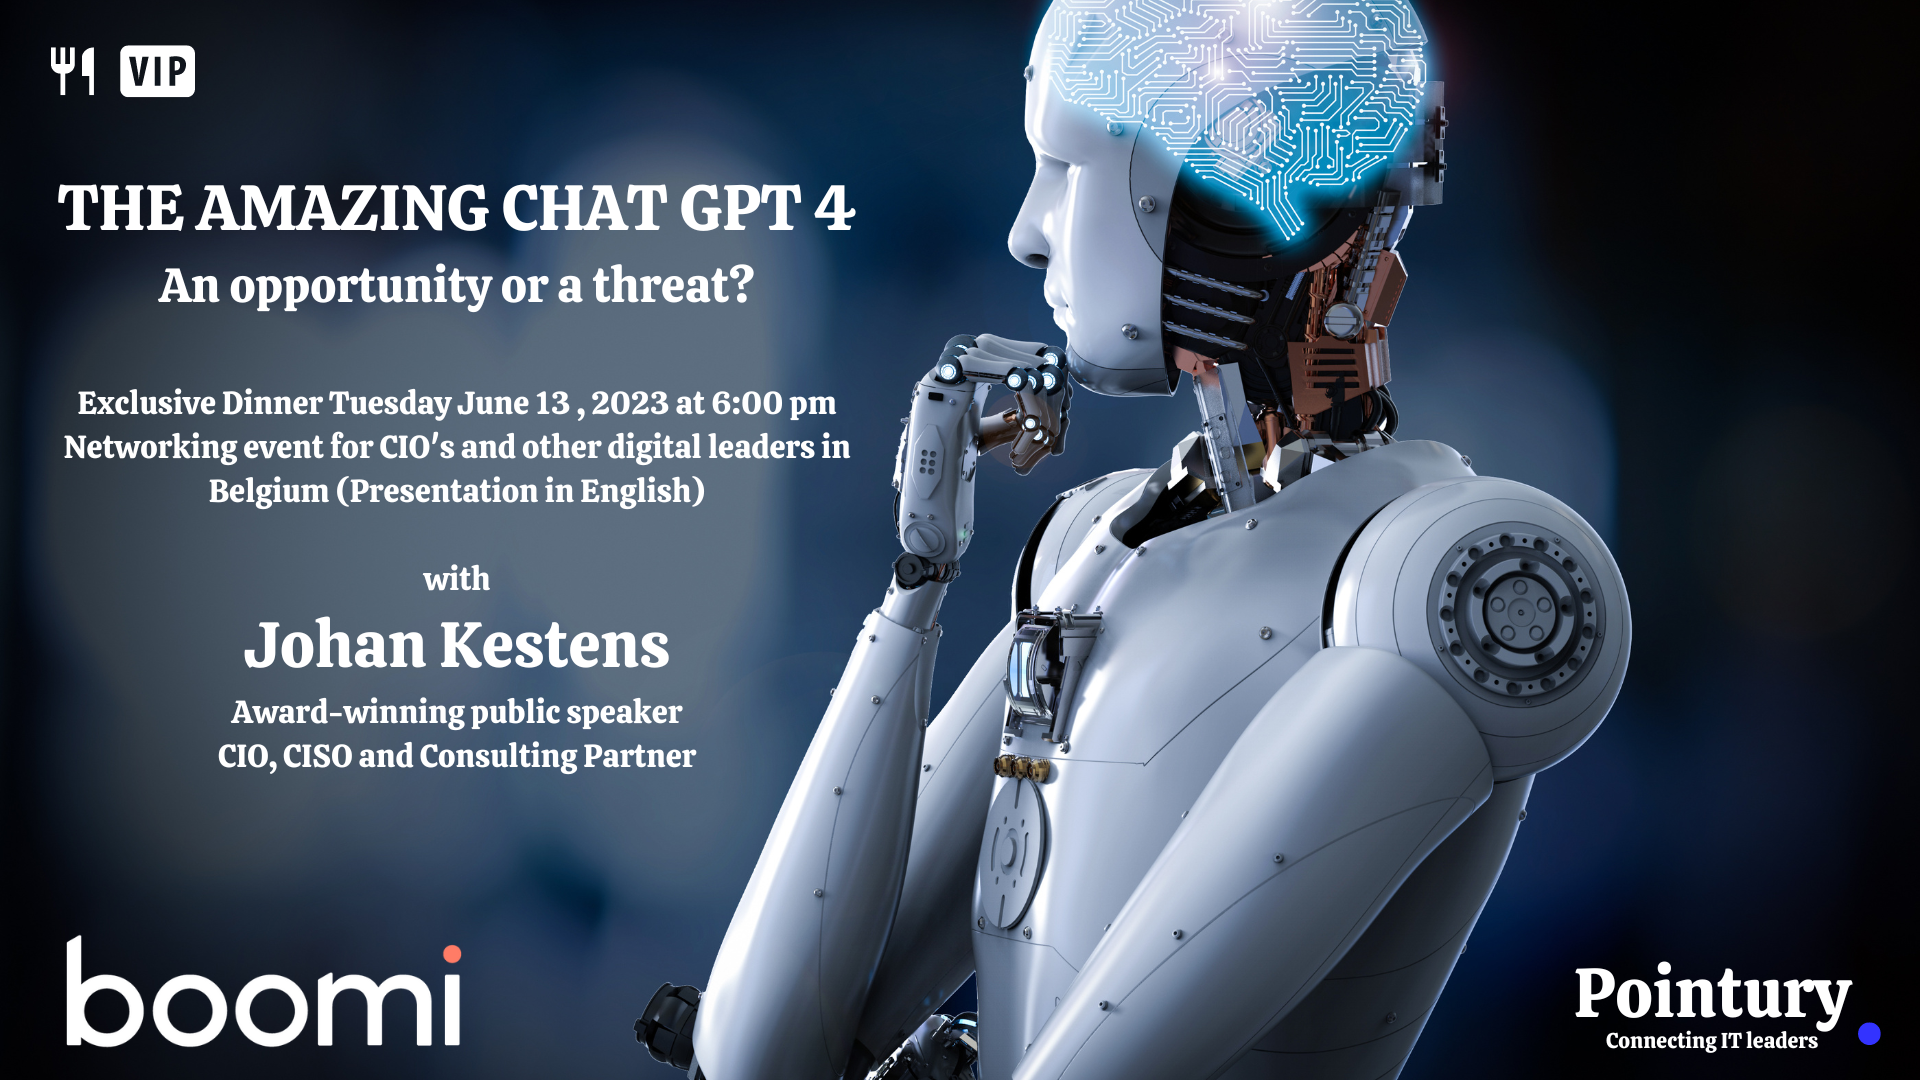 THE AMAZING CHAT GPT-4